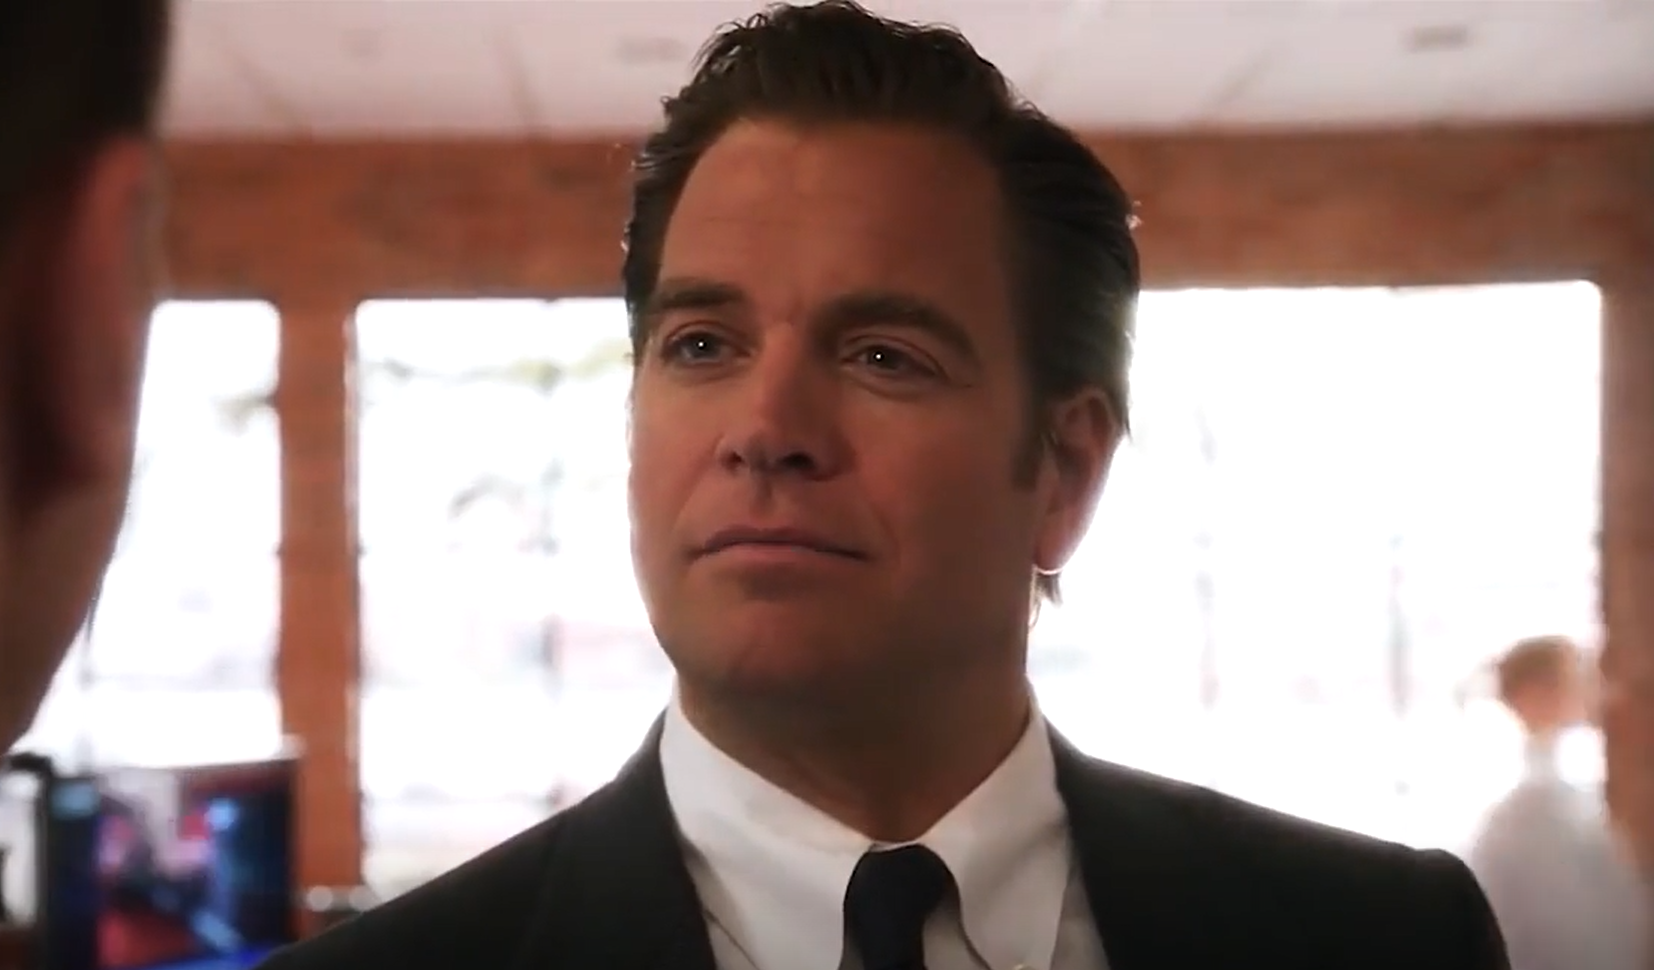 Michael Weatherly as Tony DiNozzo in the NCIS series